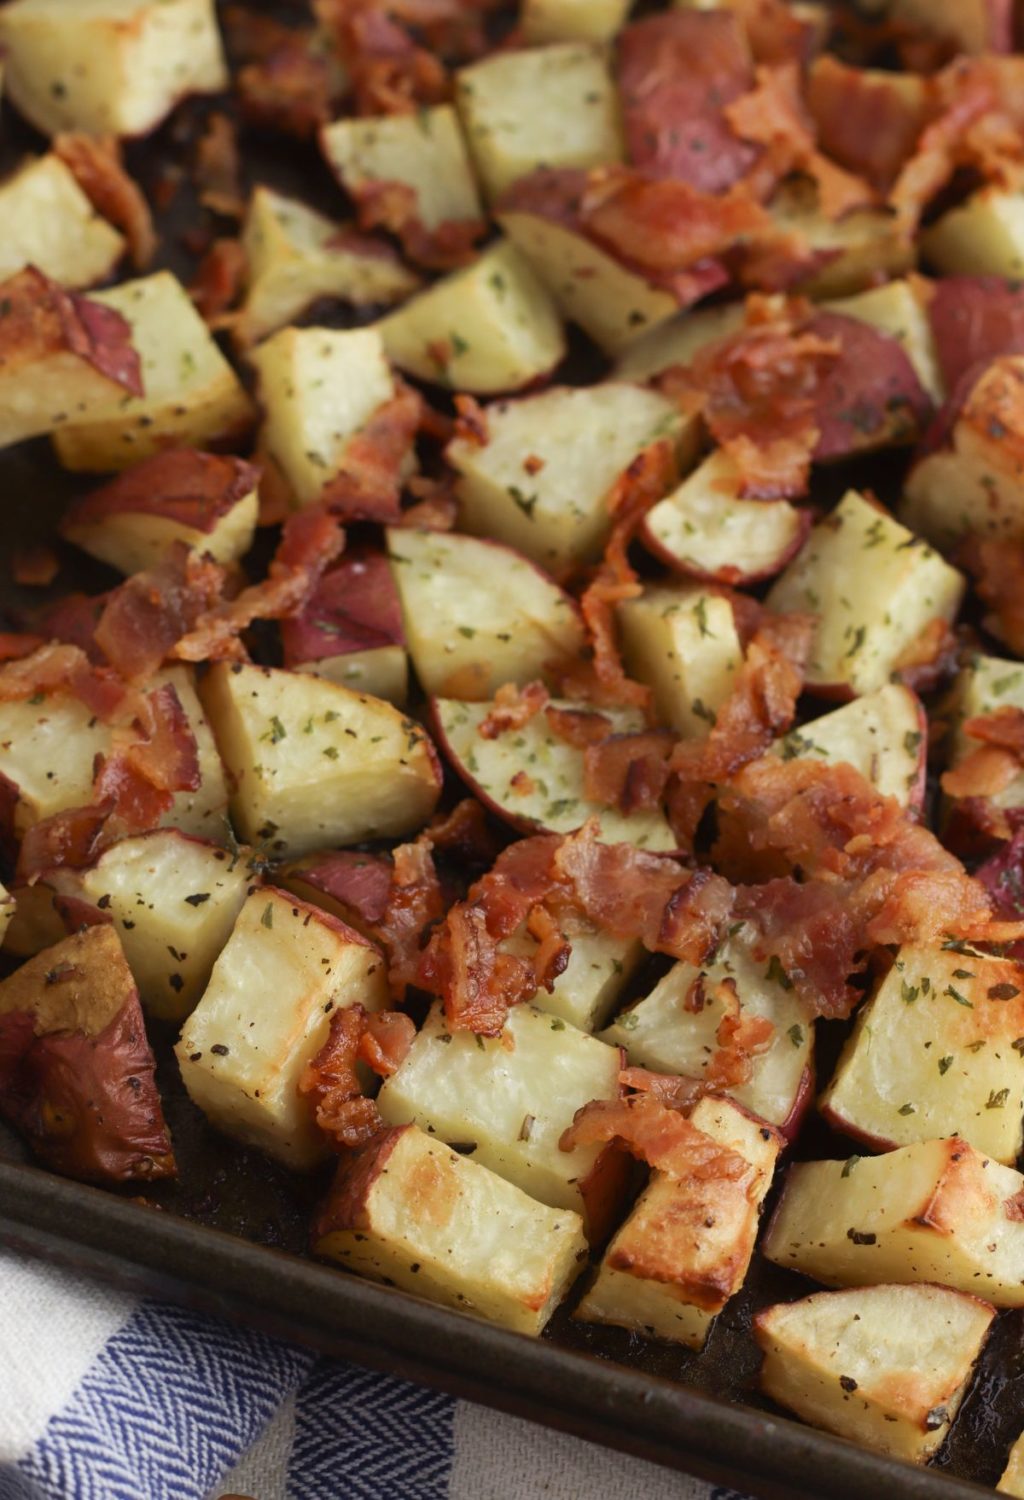 Roasted potatoes with bacon and herbs on a baking sheet.